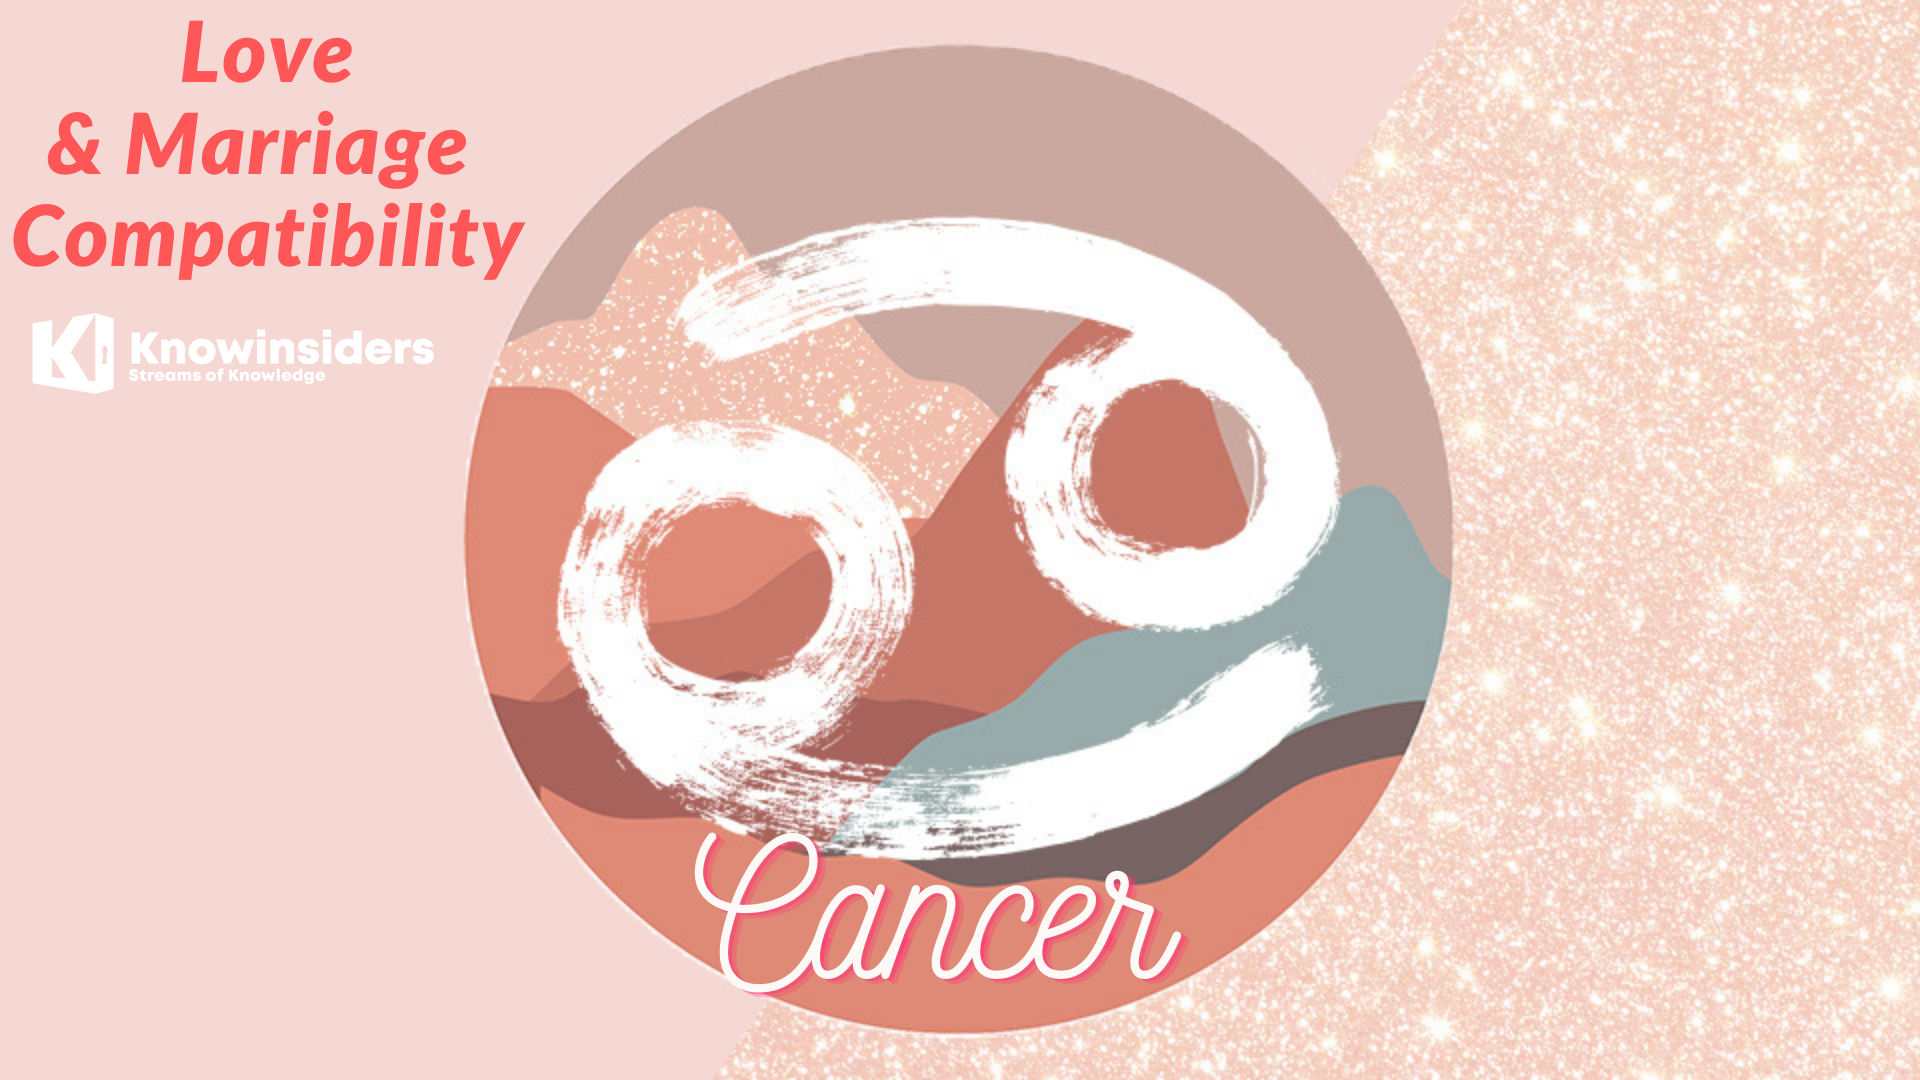 Aesthetic Cancer Zodiac Sign Wallpapers